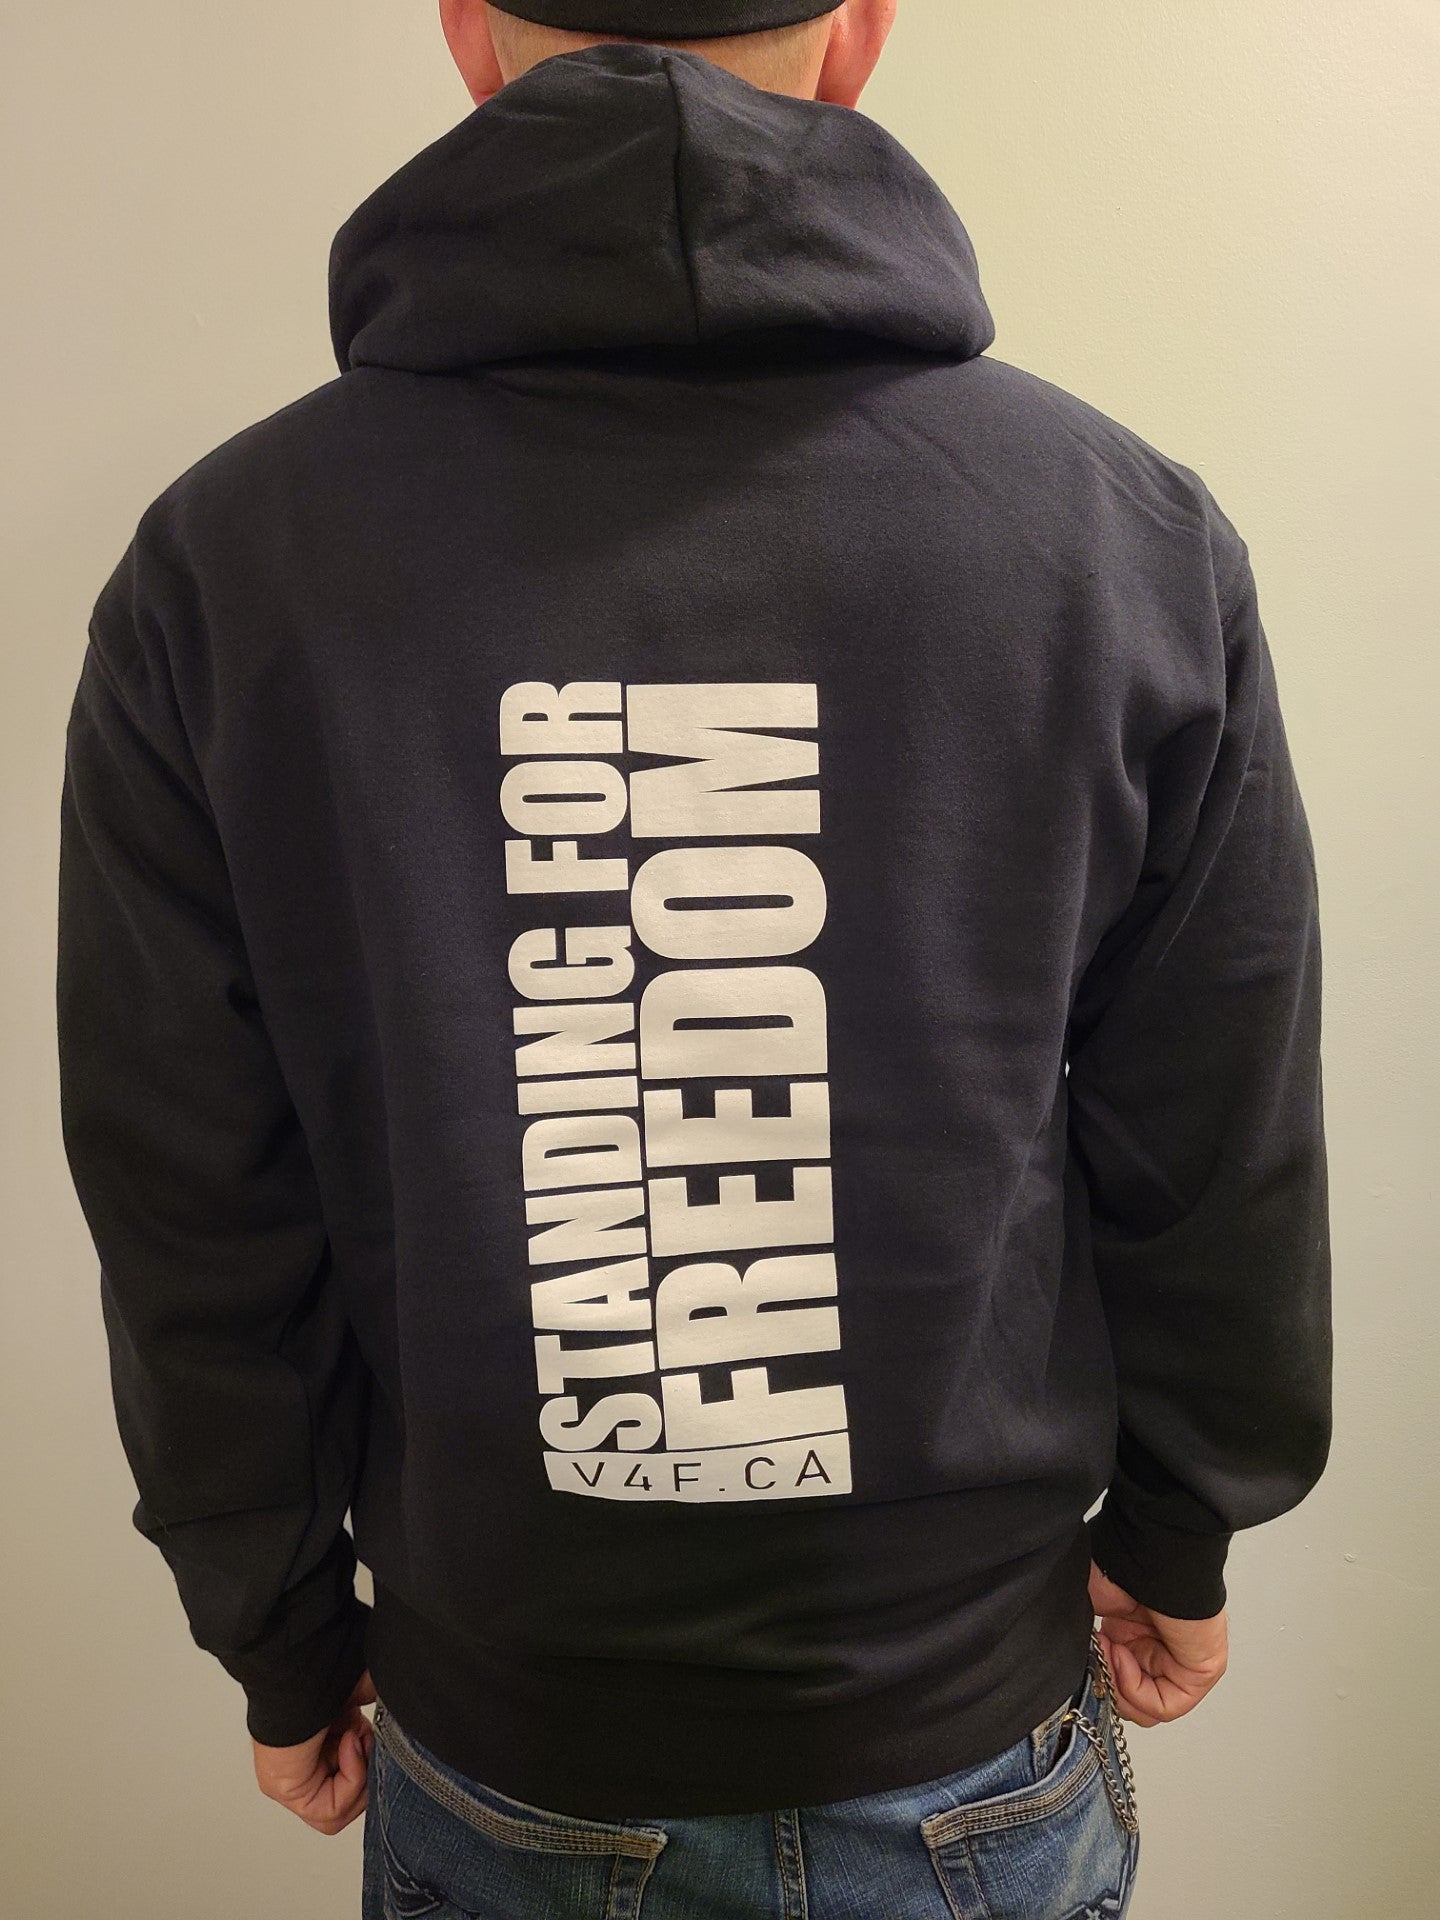 V4F Hoodie "Standing for Freedom" (fundraising)